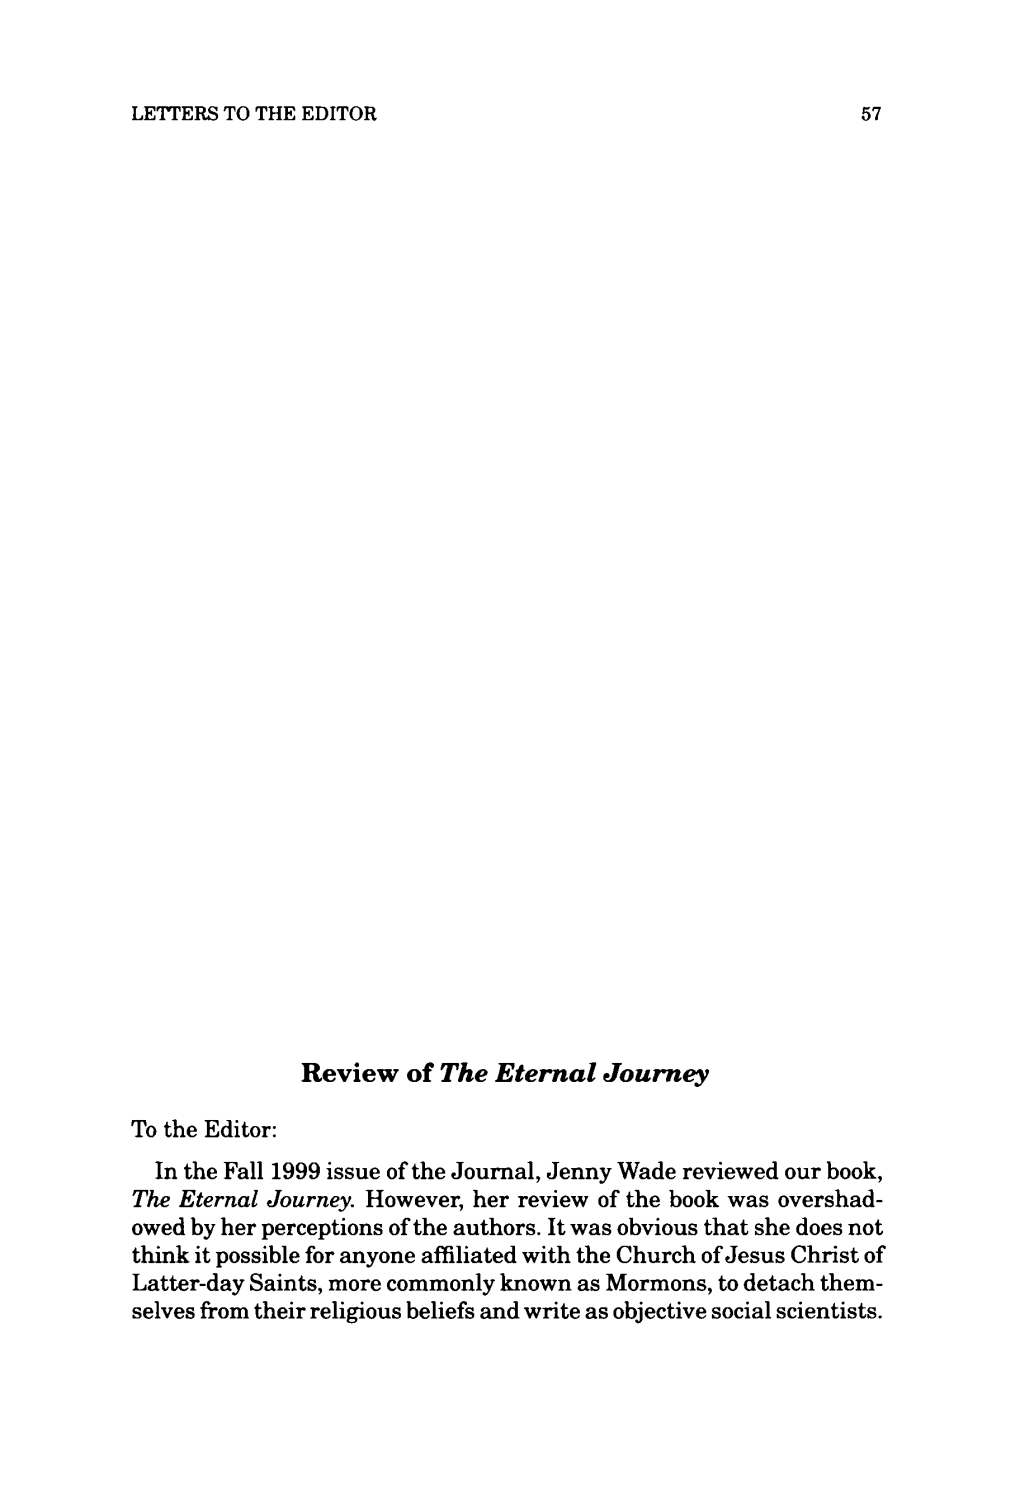 Review of the Eternal Journey